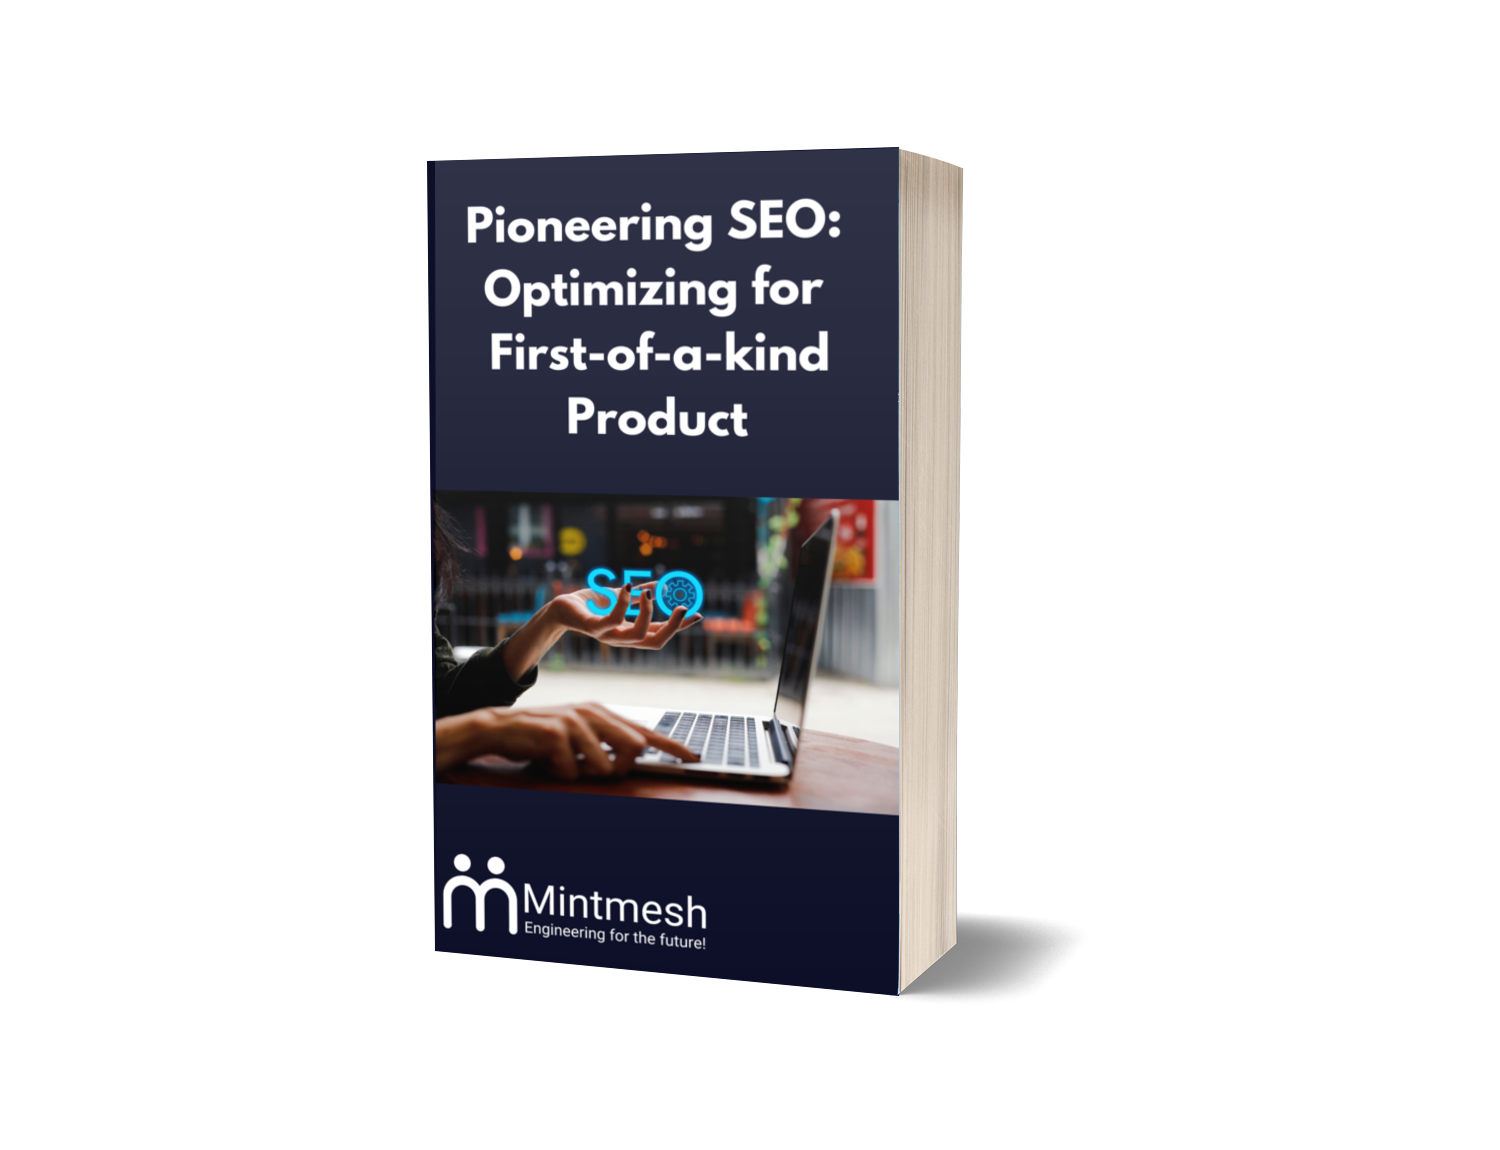 Pioneering SEO: Optimizing for First-of-a-kind Product